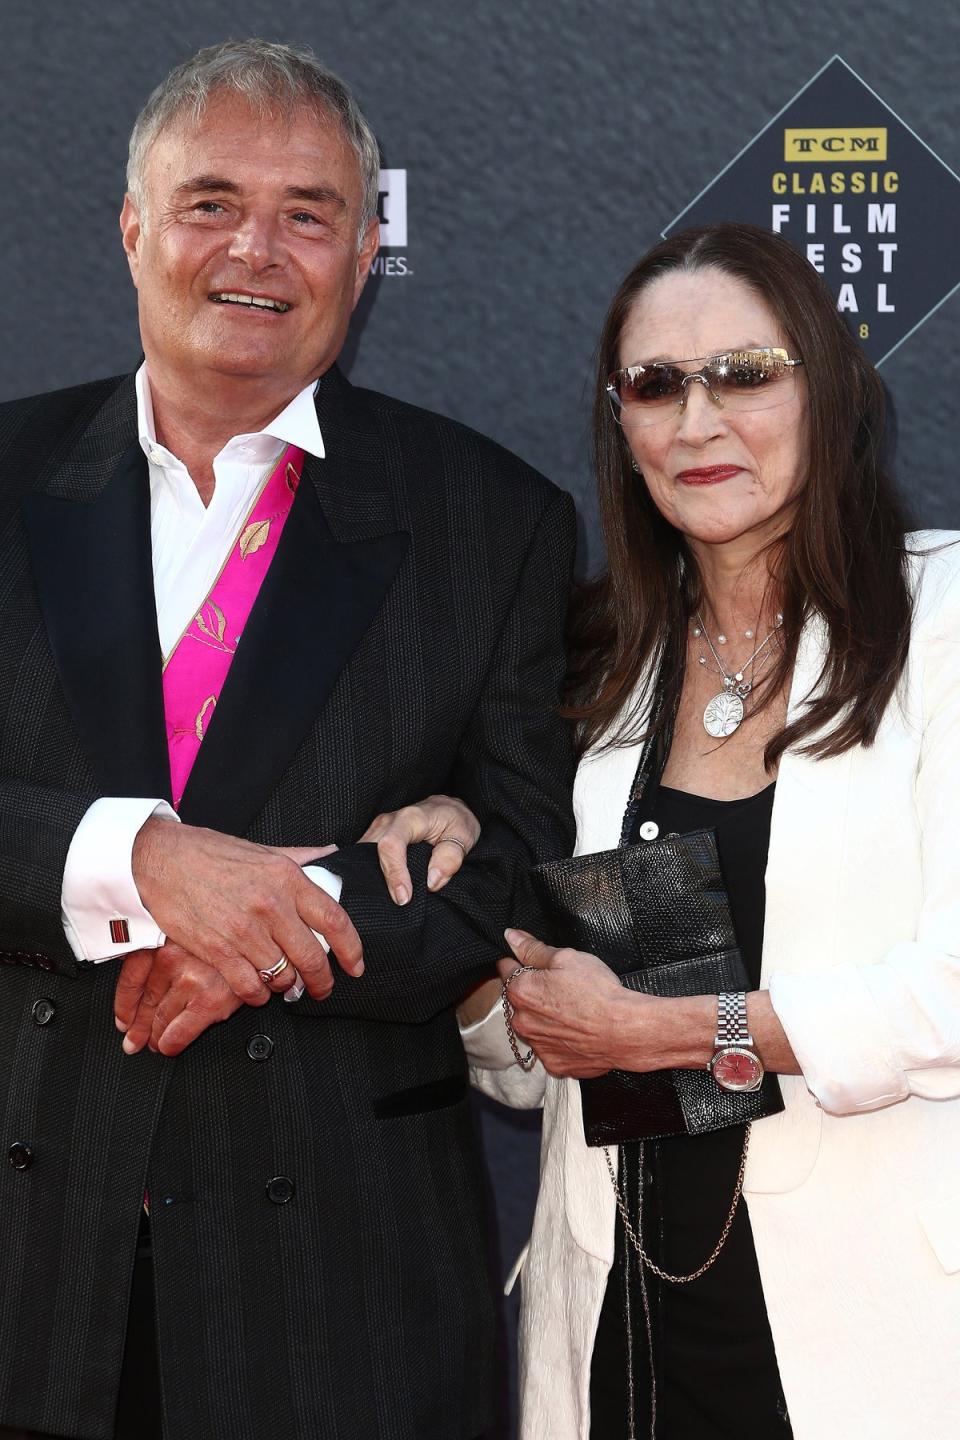 Leonard Whiting and Olivia Hussey at the 2018 TCM Classic Film Festival (Getty Images)